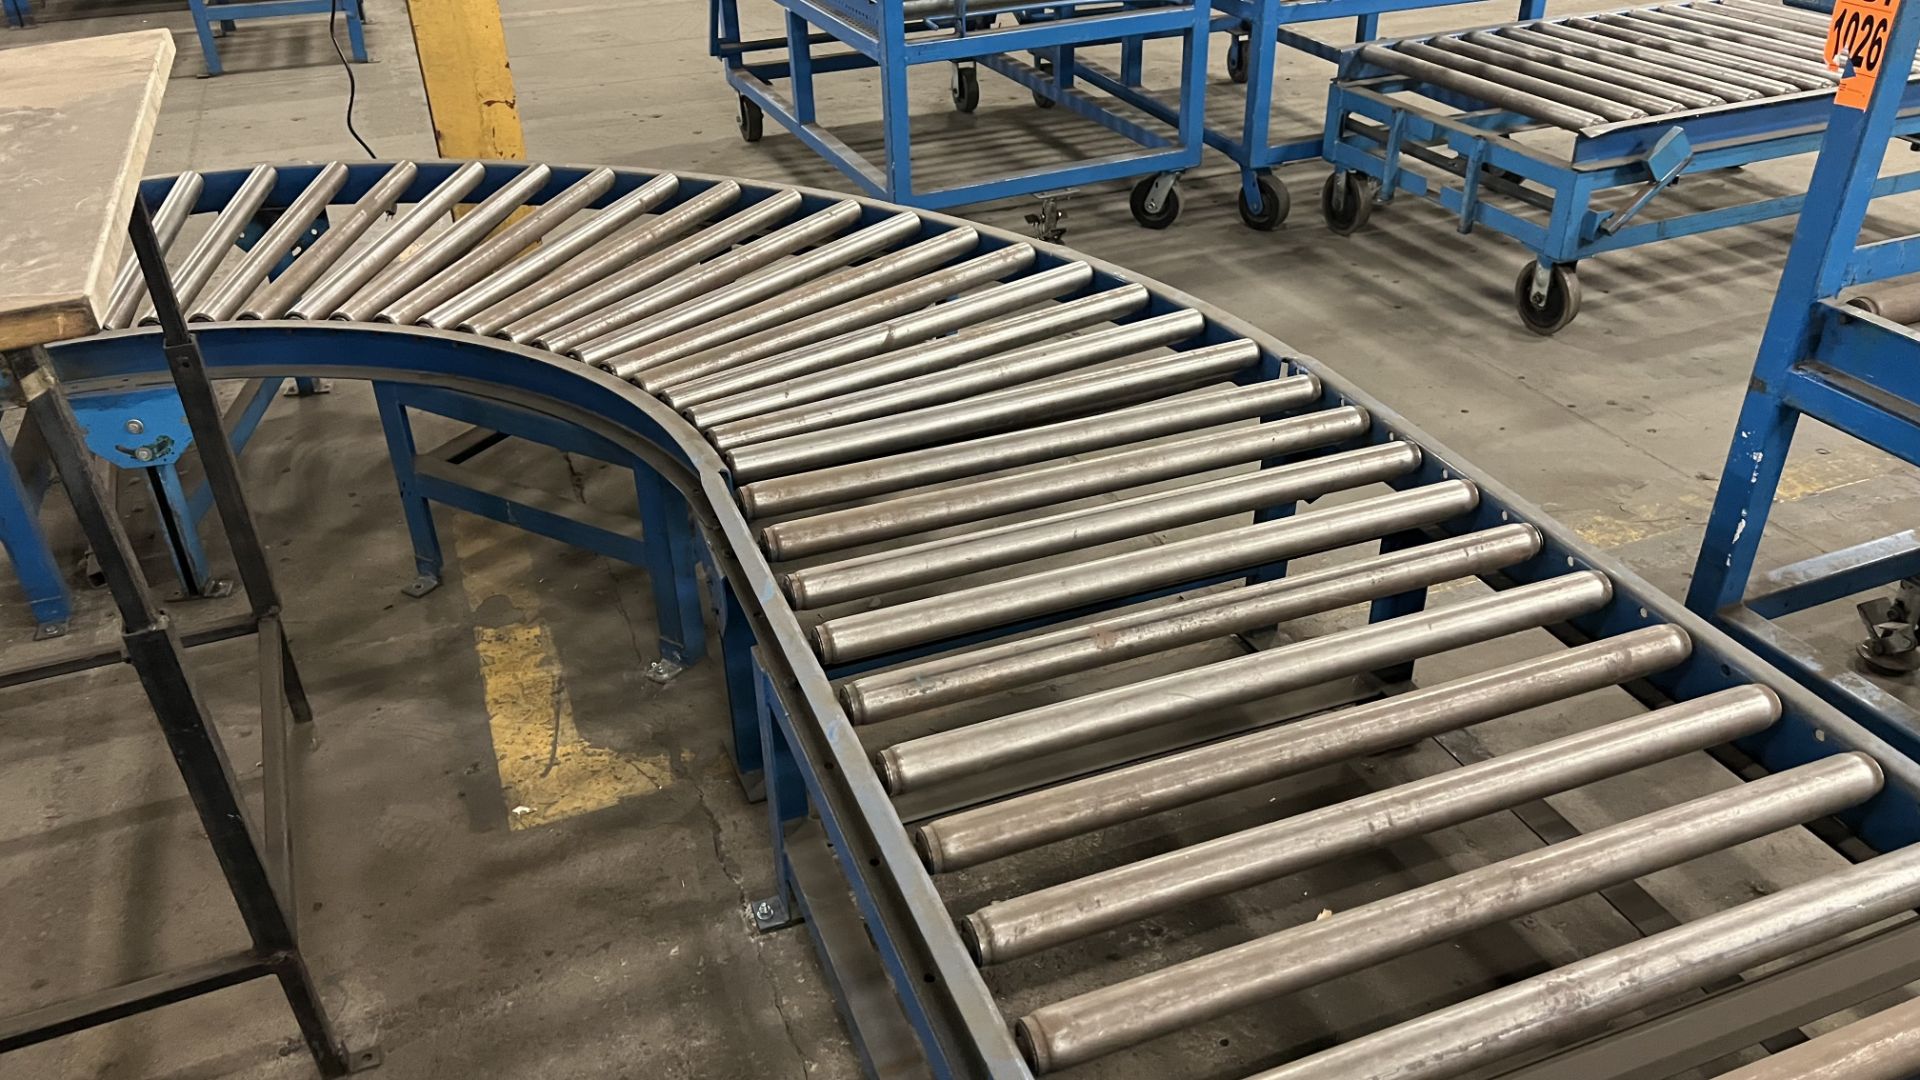 Lot of (2) steel frame manual roller conveyors w/ handles, casters, foot lock and adjustable height - Image 4 of 7